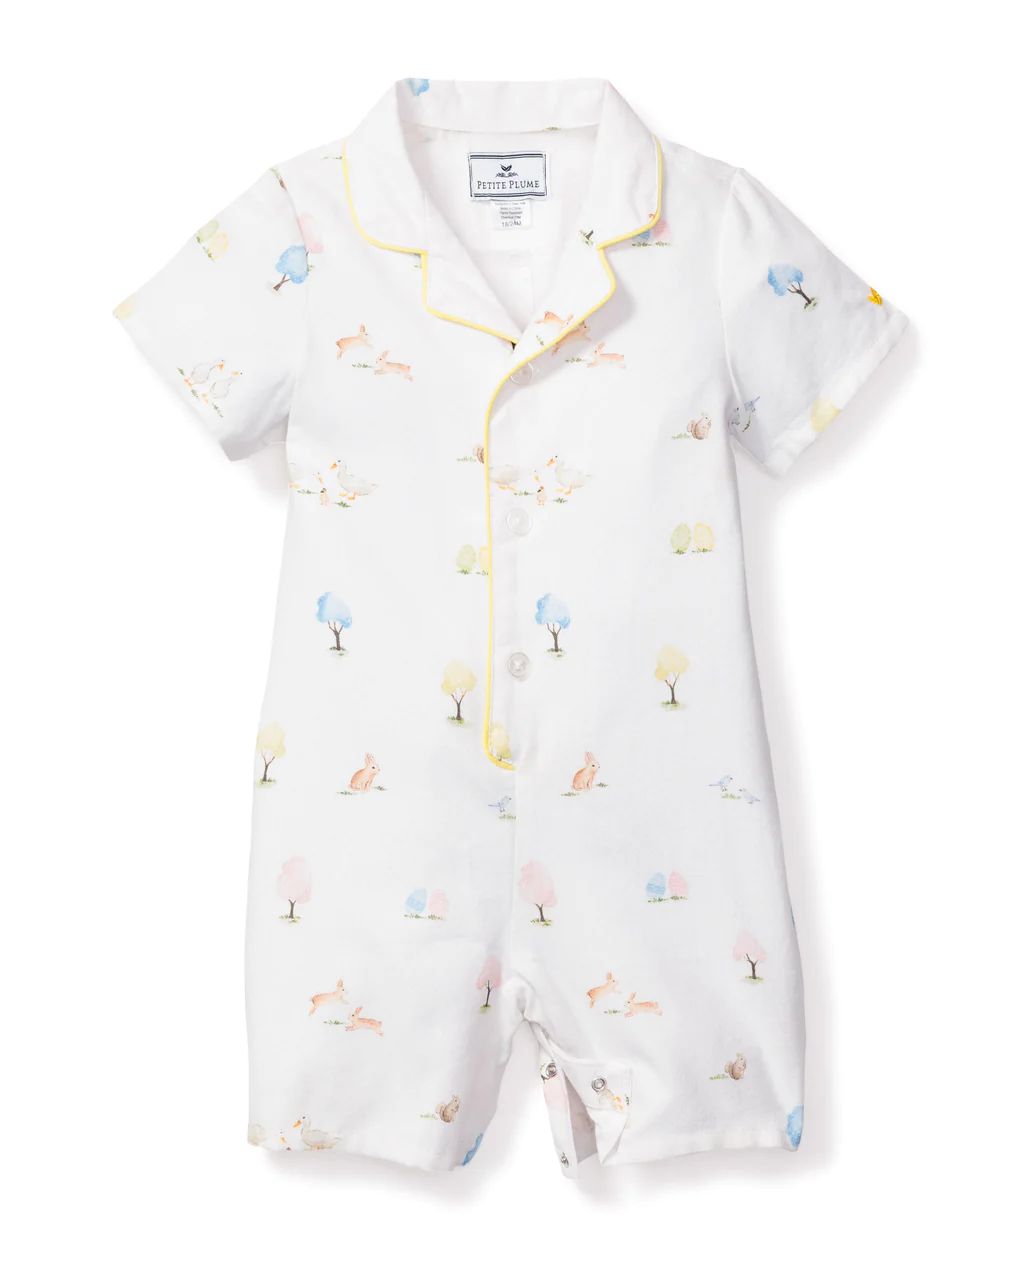 Baby's Twill Summer Romper in Easter Gardens | Petite Plume